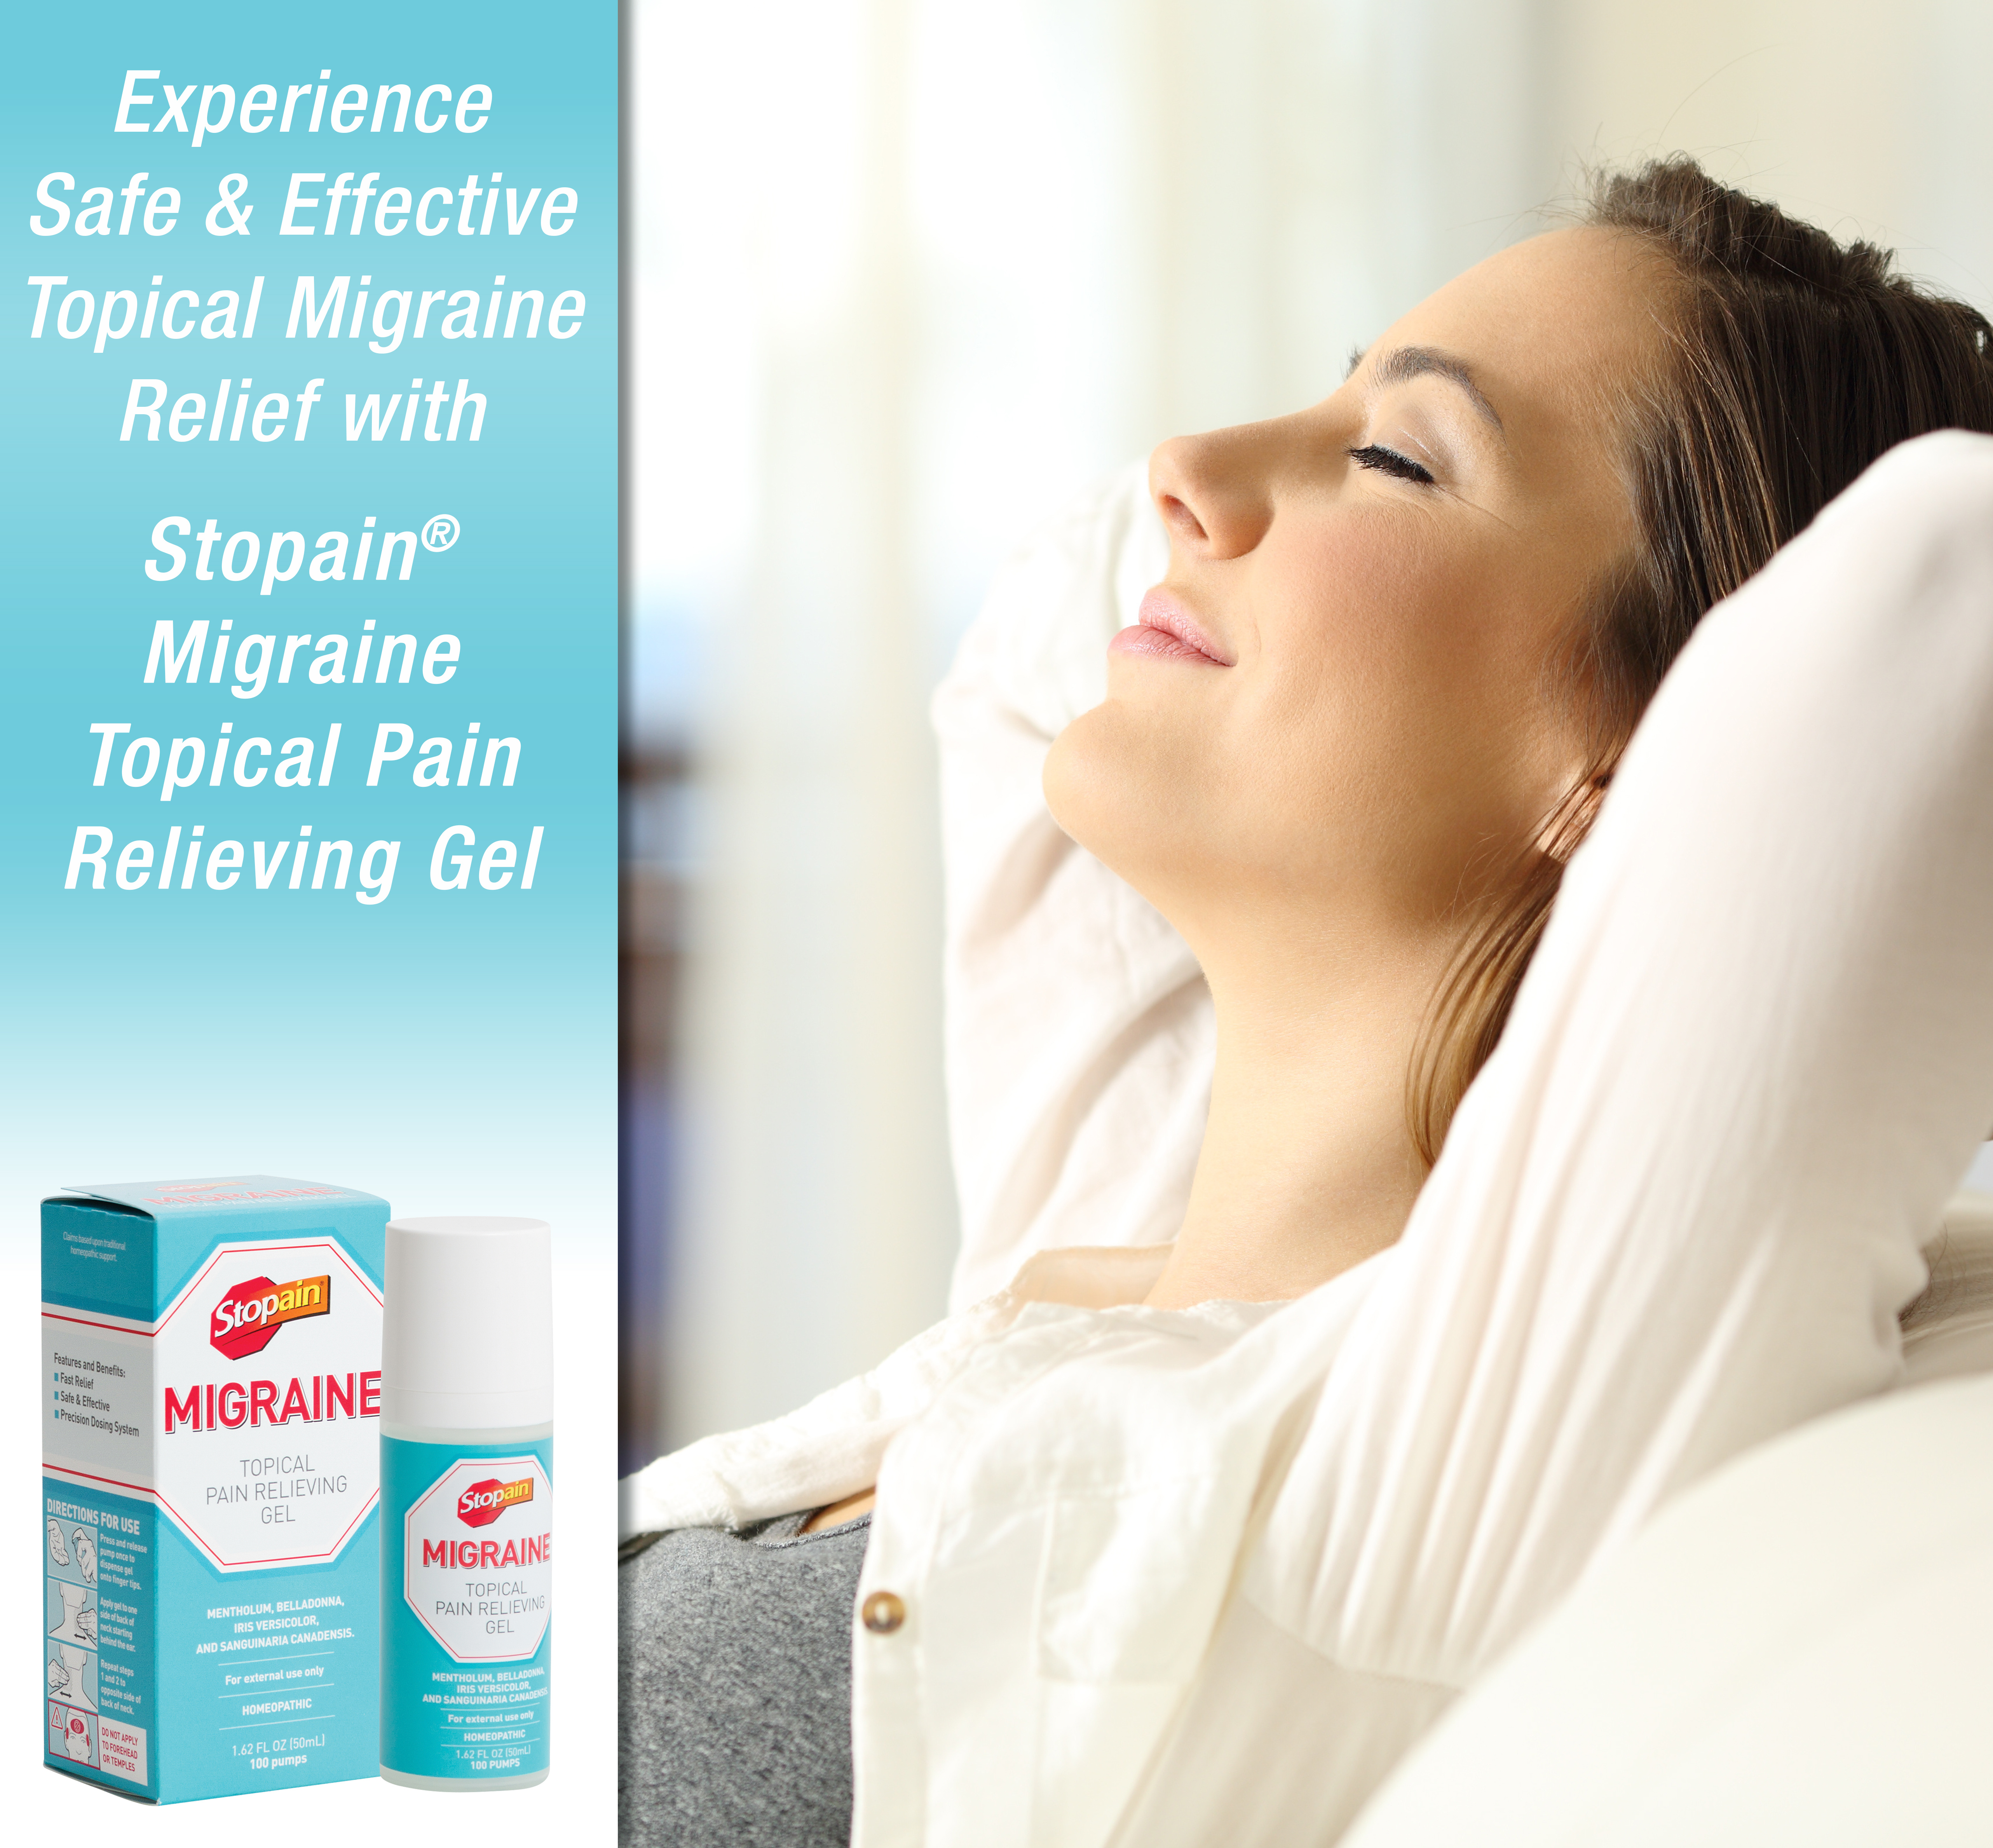 Stopain Migraine Topical Pain Relieving Gel, 1.62 fl oz - image 5 of 10